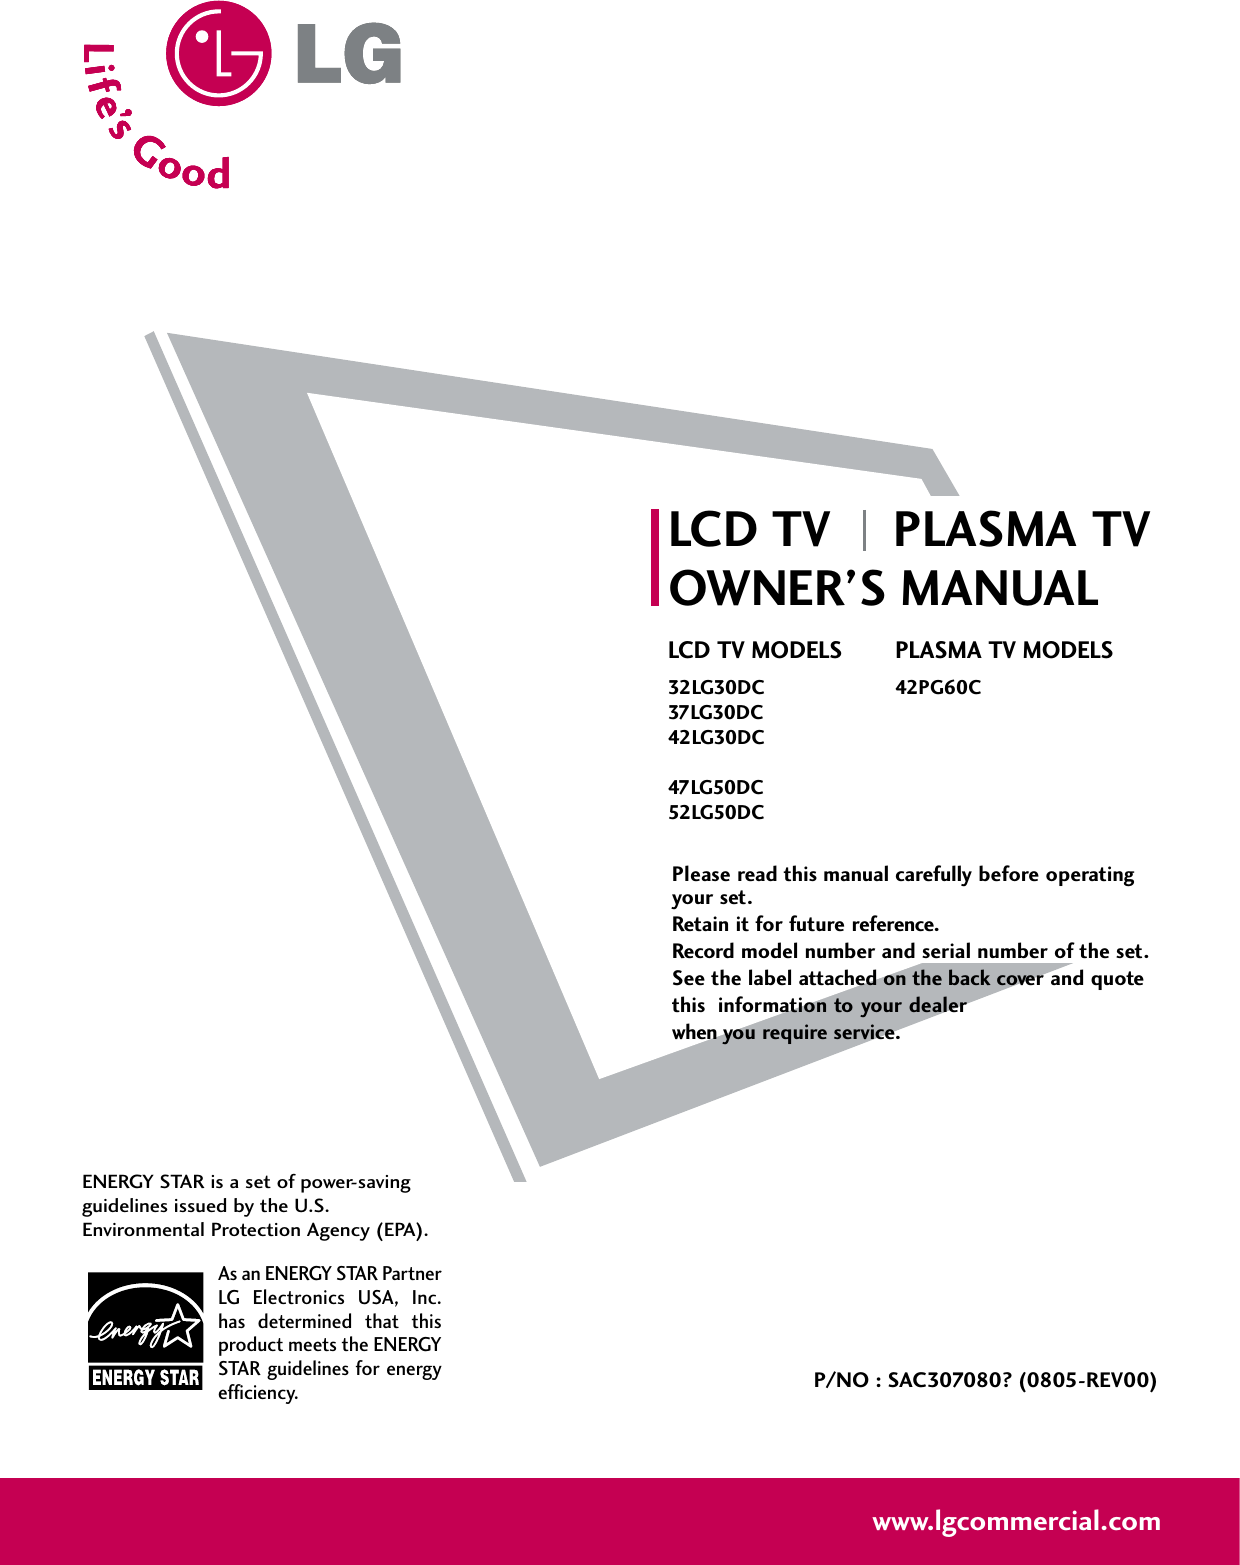 Please read this manual carefully before operatingyour set. Retain it for future reference.Record model number and serial number of the set. See the label attached on the back cover and quote this  information to your dealer when you require service.LCD TV PLASMA TVOWNER’S MANUALLCD TV MODELS32LG30DC37LG30DC42LG30DC47LG50DC52LG50DCPLASMA TV MODELS42PG60CP/NO : SAC307080? (0805-REV00)www.lgcommercial.comAs an ENERGY STAR PartnerLG  Electronics  USA,  Inc.has  determined  that  thisproduct meets the ENERGYSTAR guidelines for energyefficiency.ENERGY STAR is a set of power-savingguidelines issued by the U.S.Environmental Protection Agency (EPA).